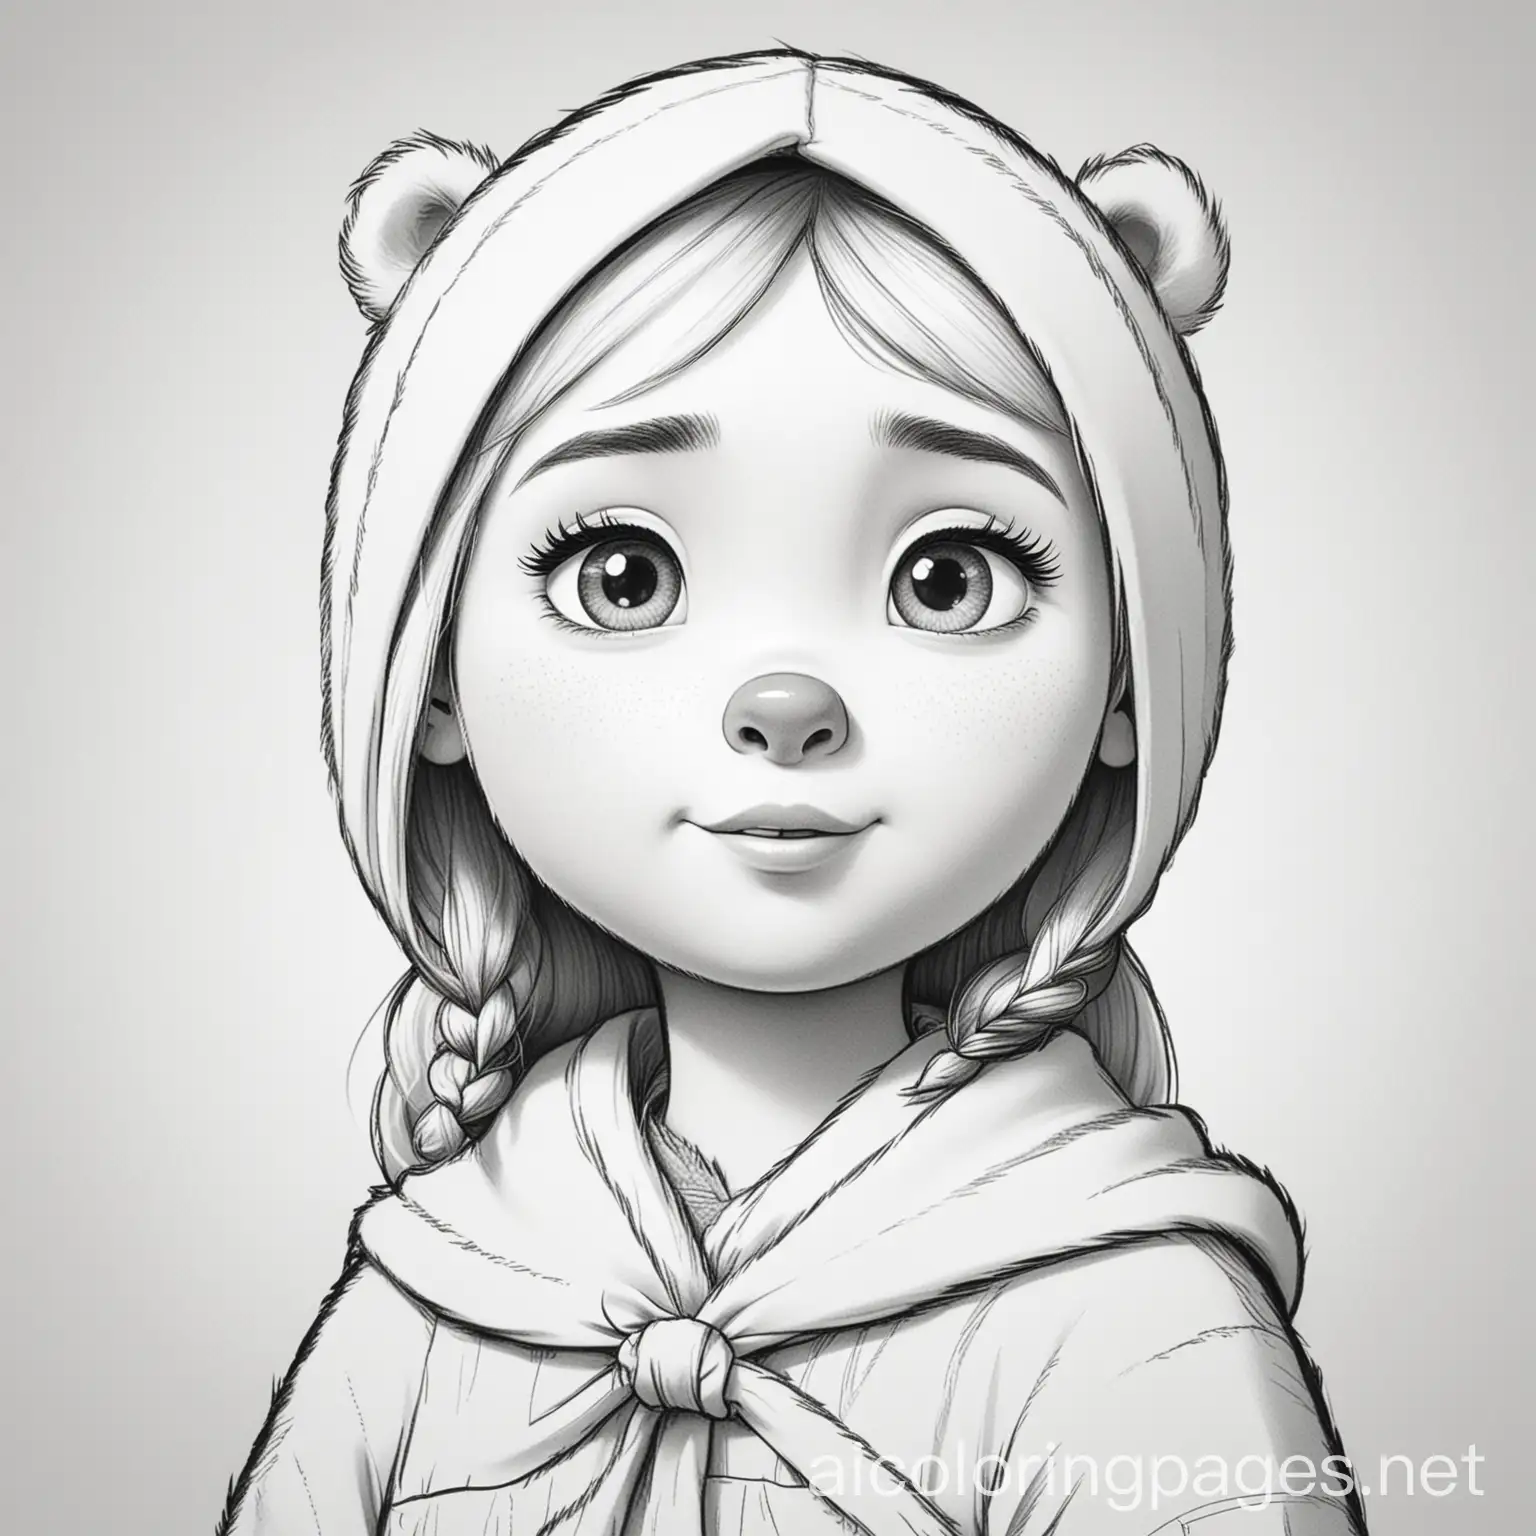 Masha-and-Bear-Coloring-Page-in-Black-and-White-Line-Art-on-White-Background